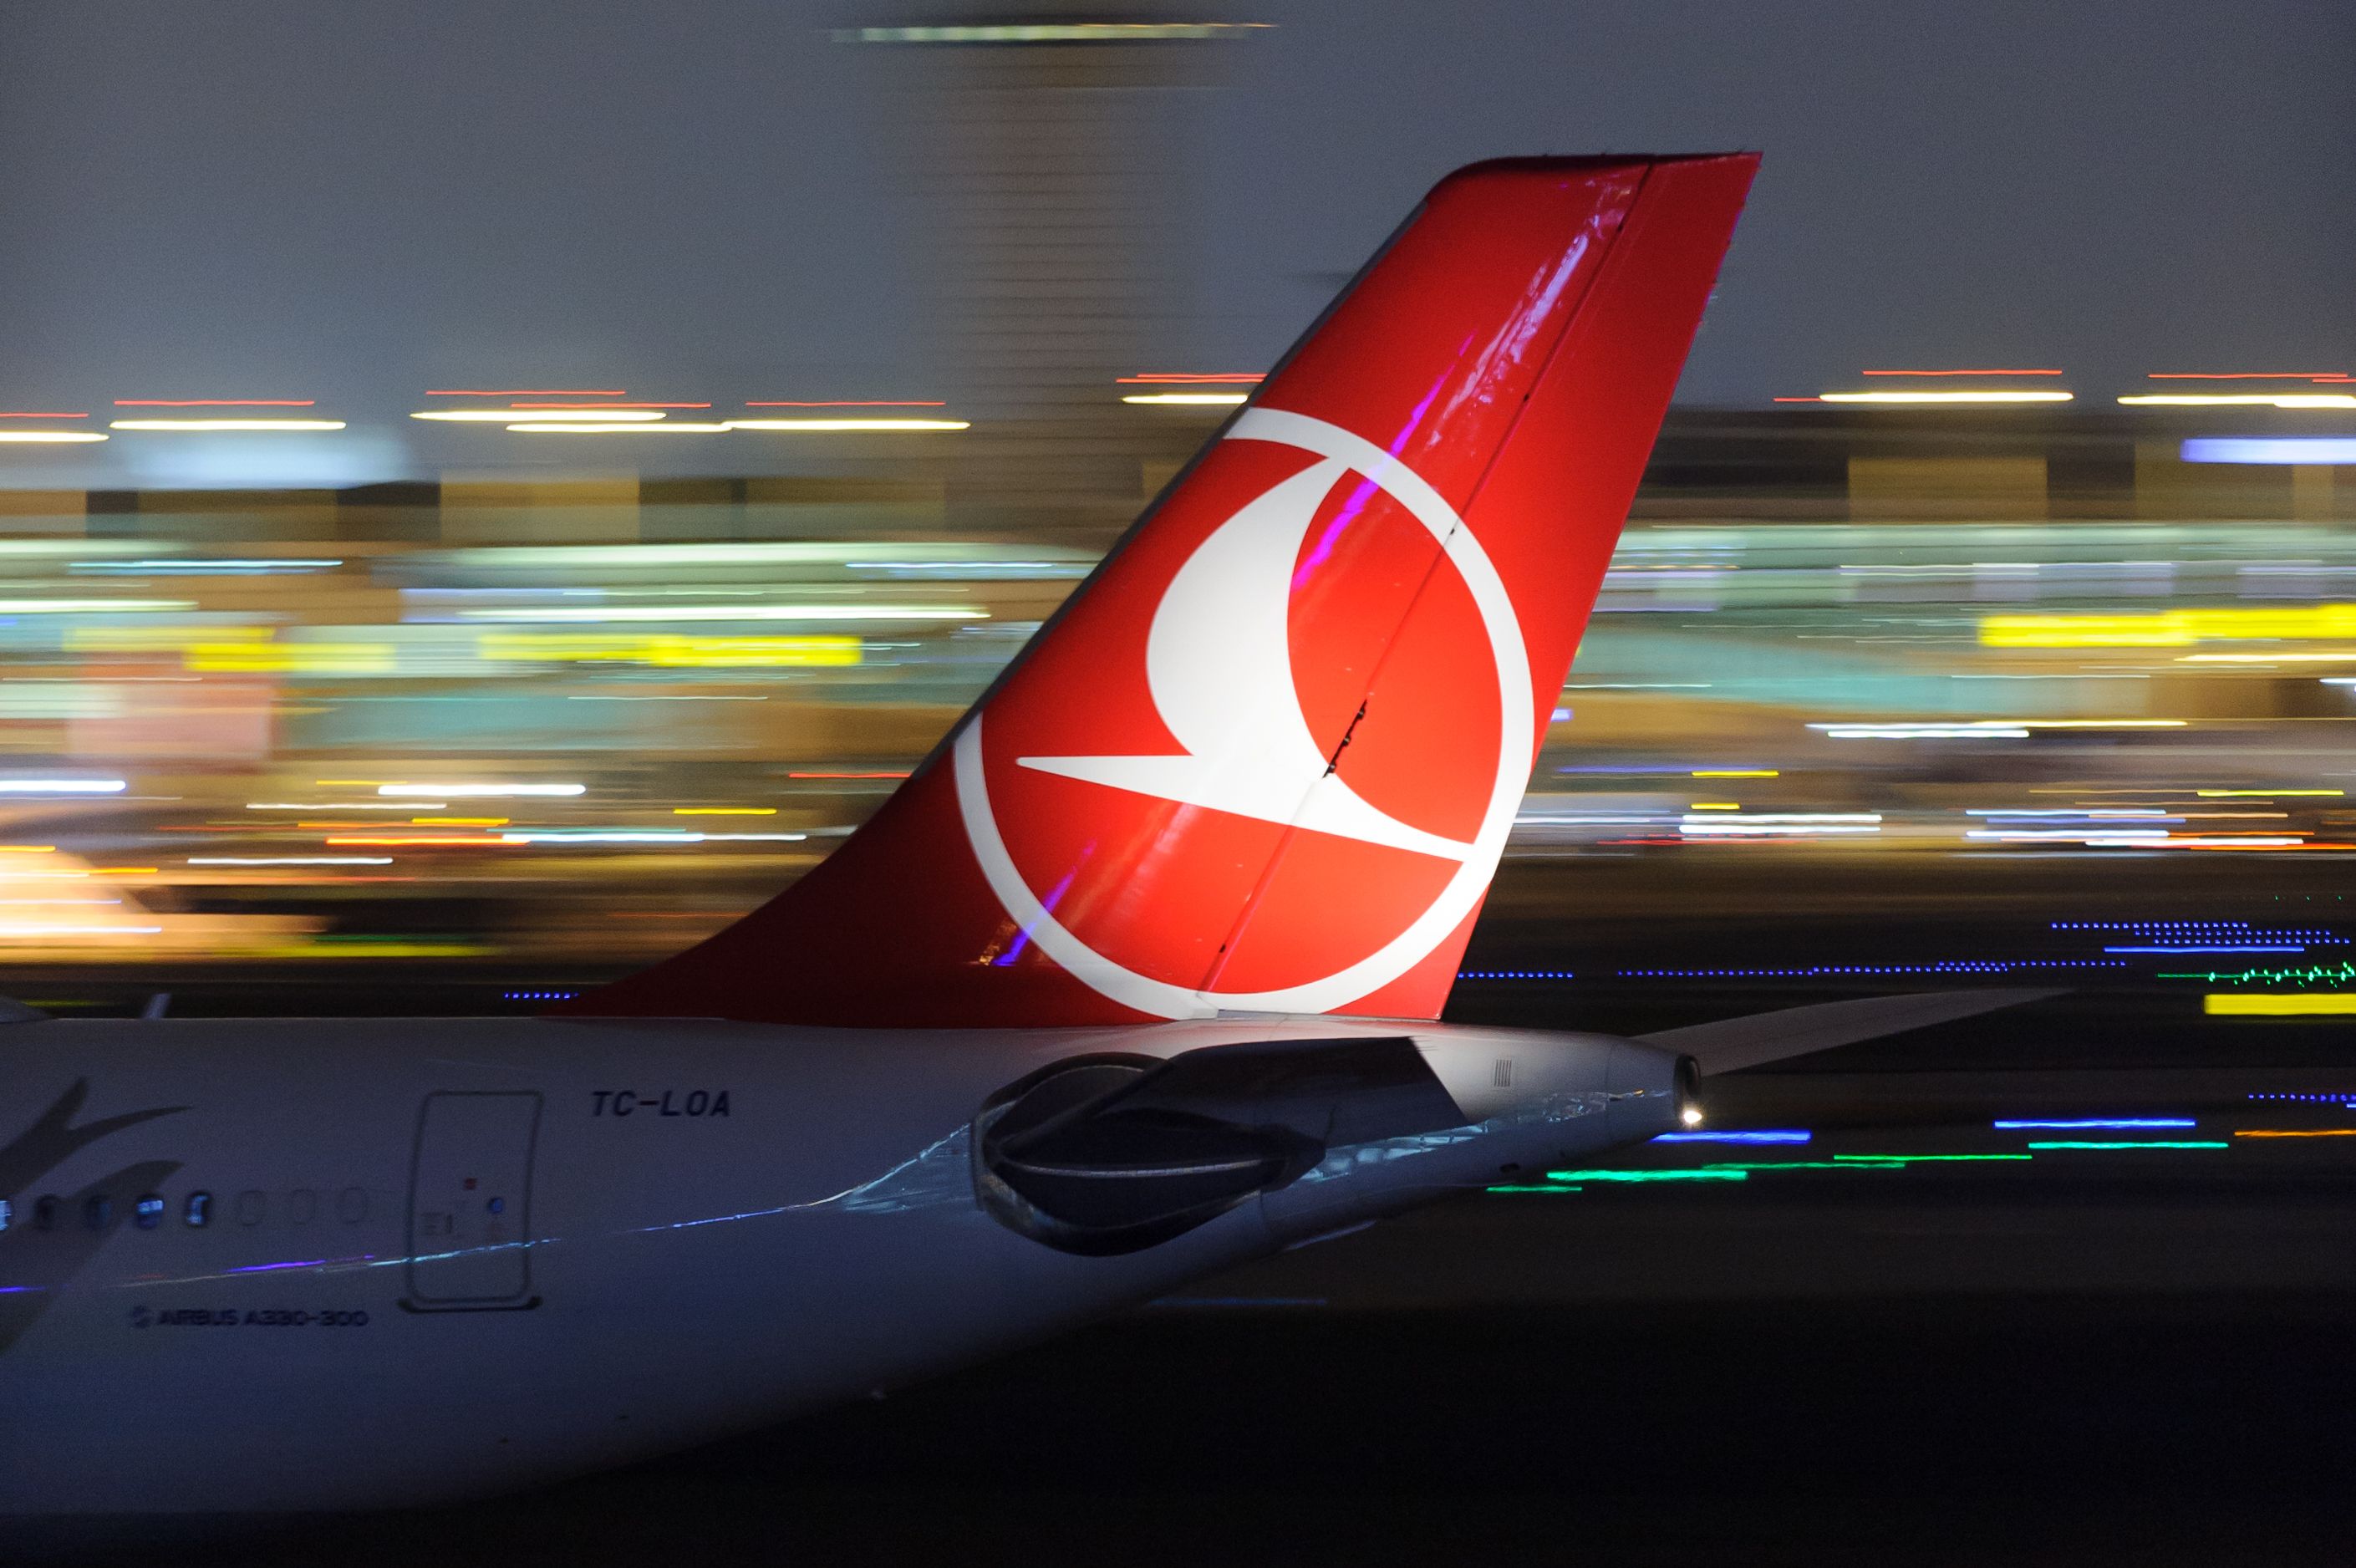 Turkish Airlines aircraft tail at night